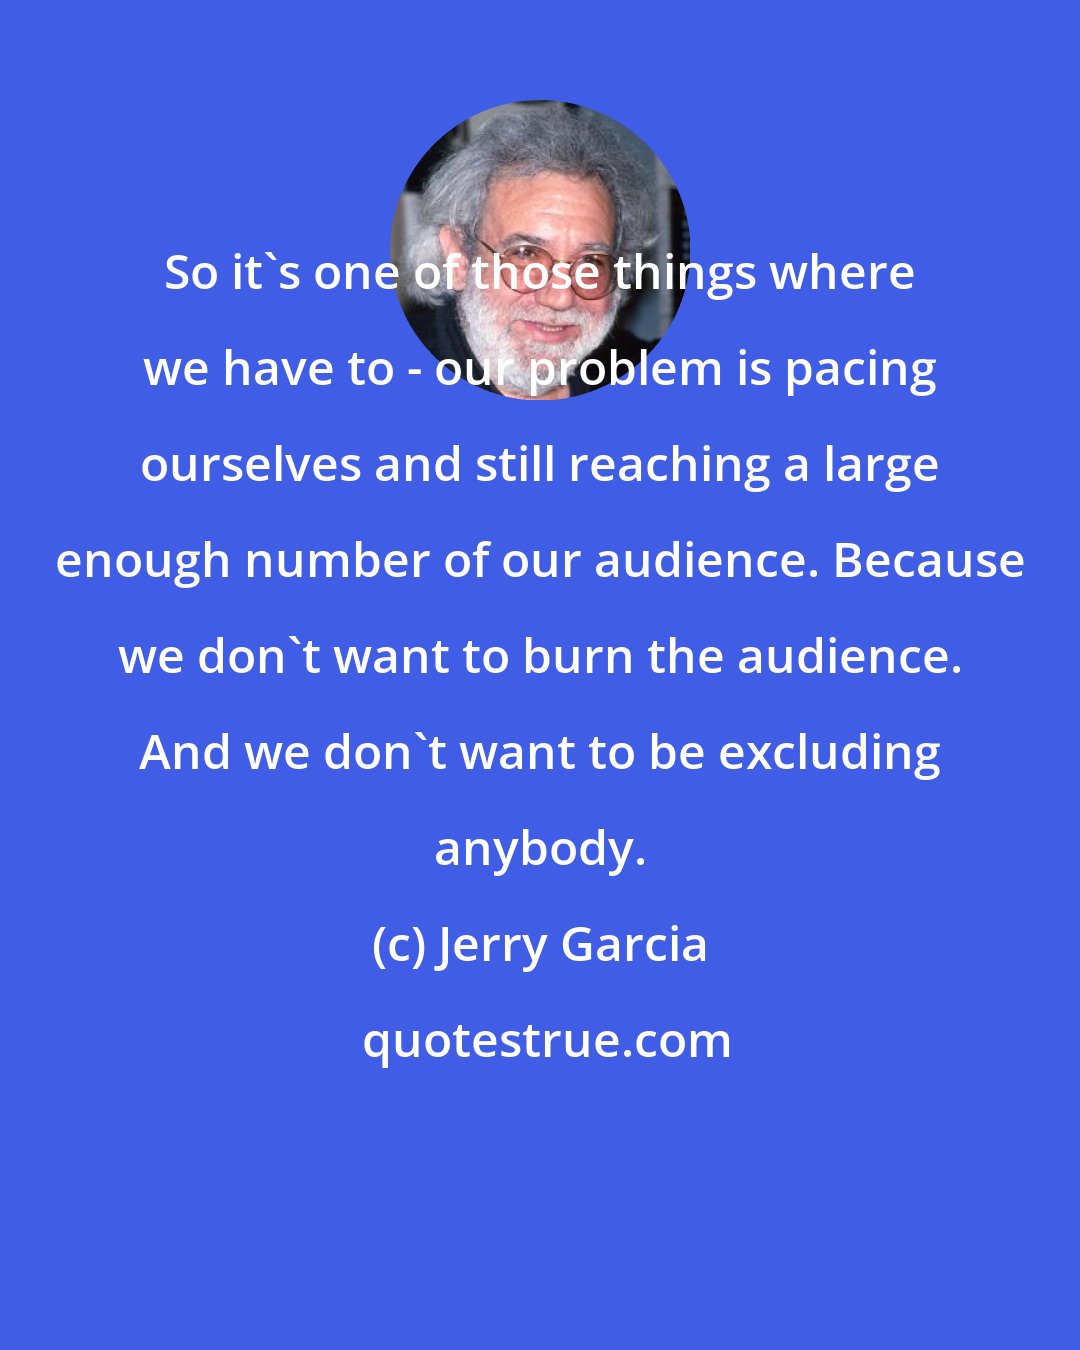 Jerry Garcia: So it's one of those things where we have to - our problem is pacing ourselves and still reaching a large enough number of our audience. Because we don't want to burn the audience. And we don't want to be excluding anybody.